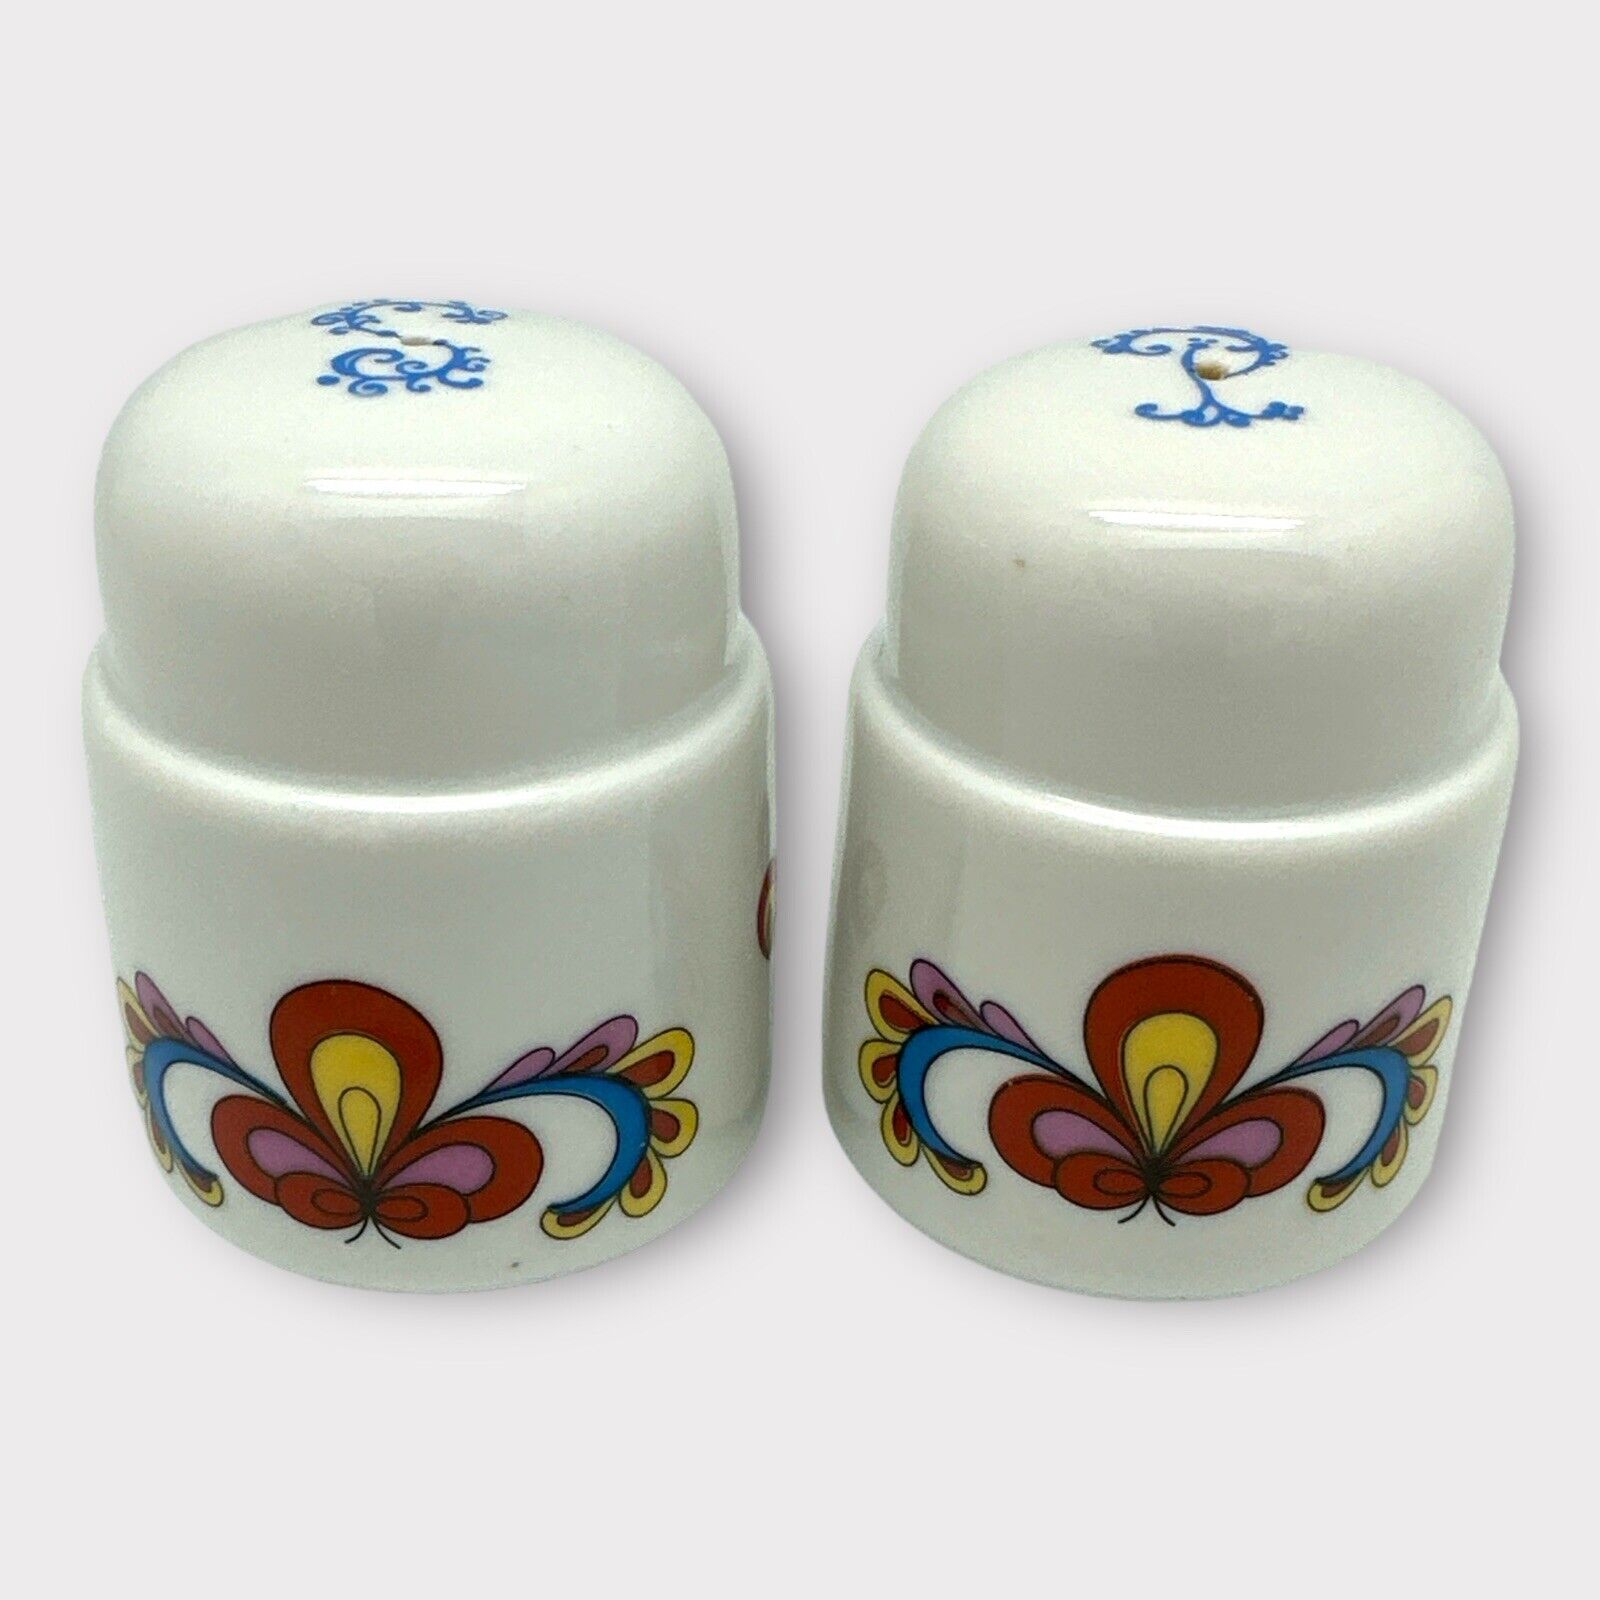 Vntg Porsgrund FARMERS ROSE SALT and PEPPER ShakerS Blue S & P On Top Norway